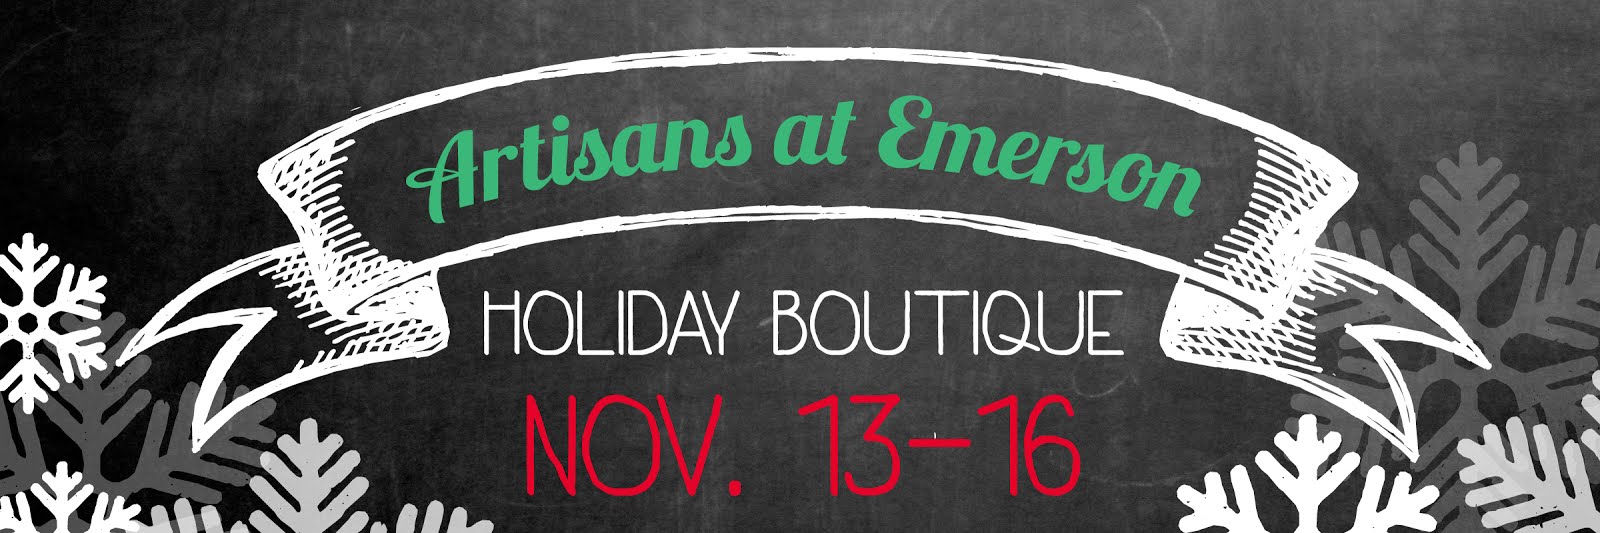 Holiday Boutique - Artisans at Emerson